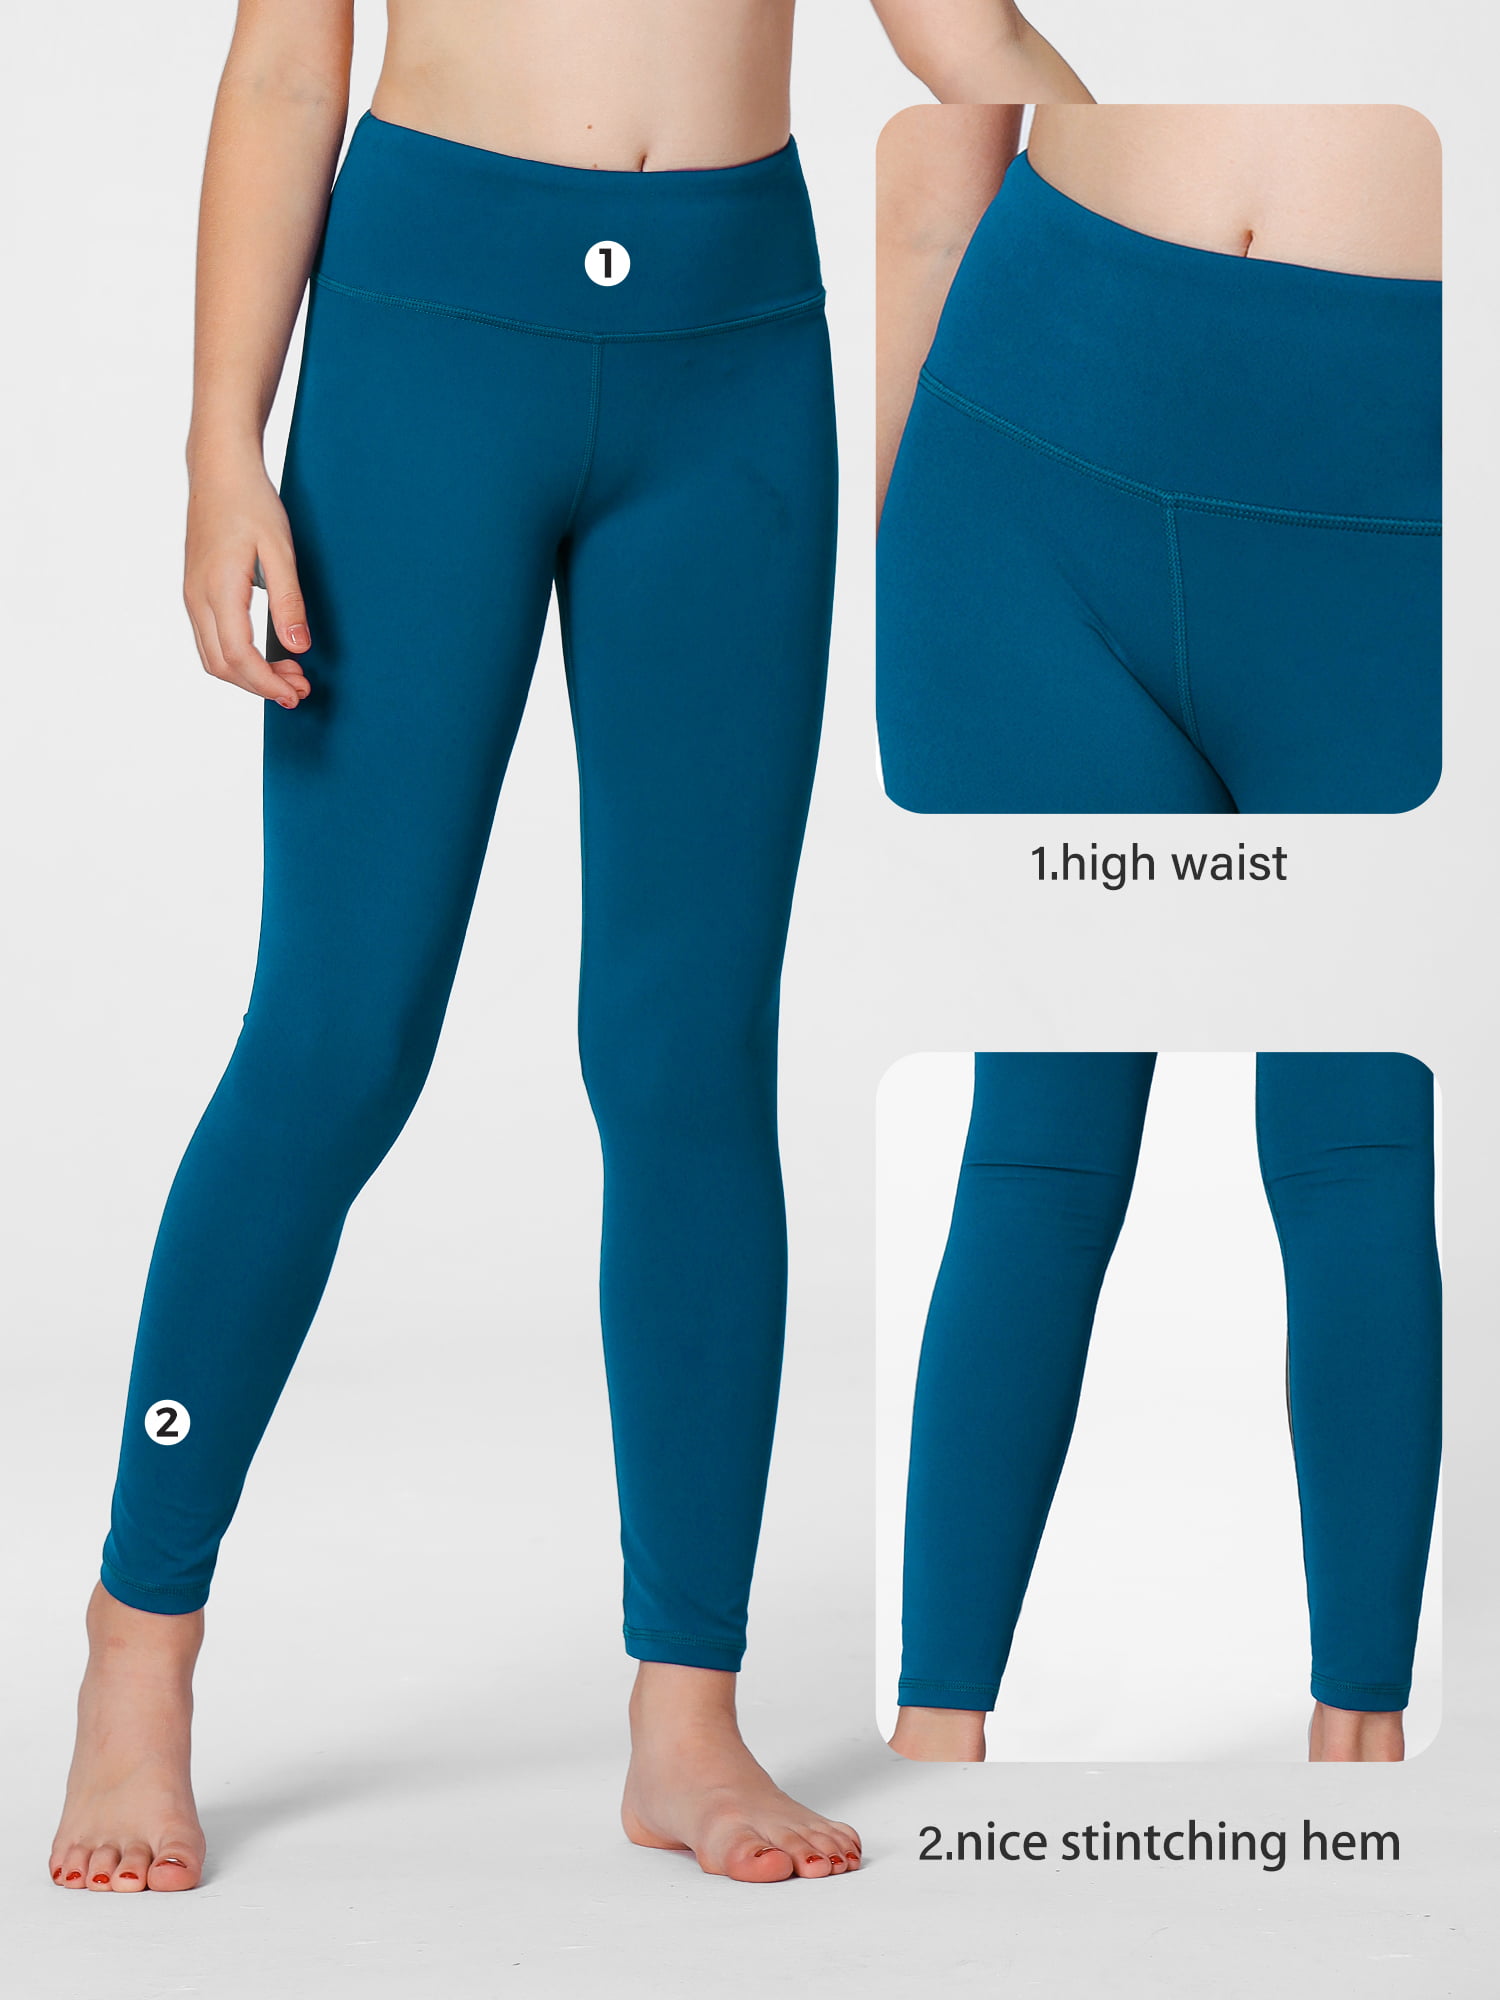 Girls Yoga Leggings Soft, Elastic, And Perfect For Sports, Dancing,  Workouts, Knee High Best Running Tights Women, Sweatpants, Sports Pants, Or  Childrens Skinny Pants LU 1456 From Lee_hee, $13.75